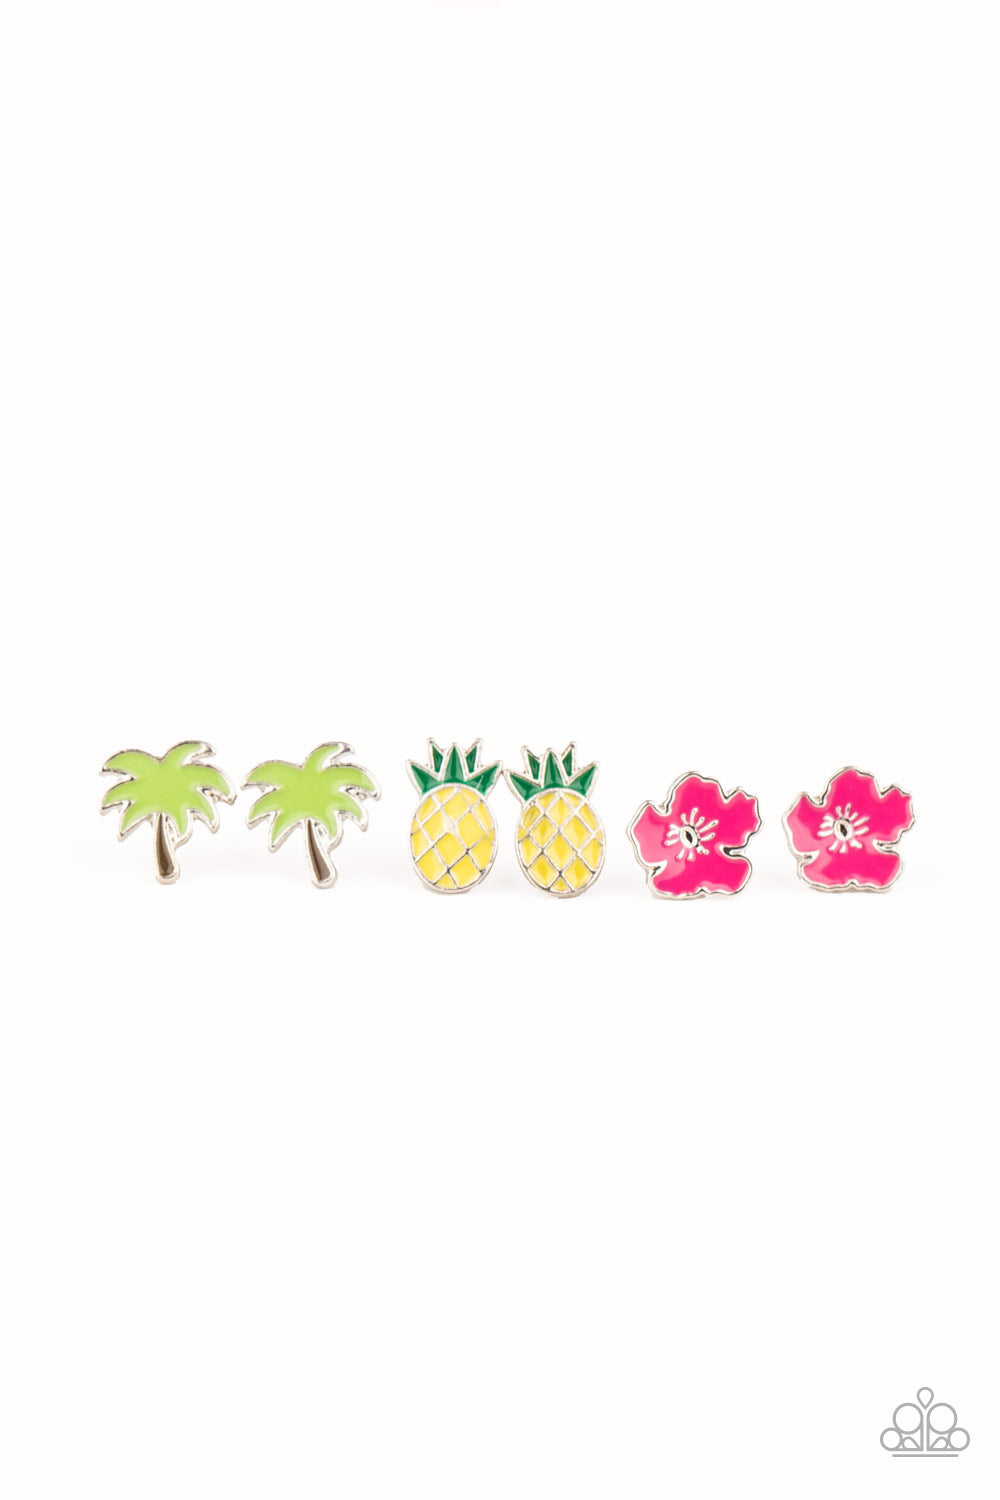 TROPICAL VACATION EARRINGS SET - ASSORTED SET OF 5 PAIRS OF EARRINGS